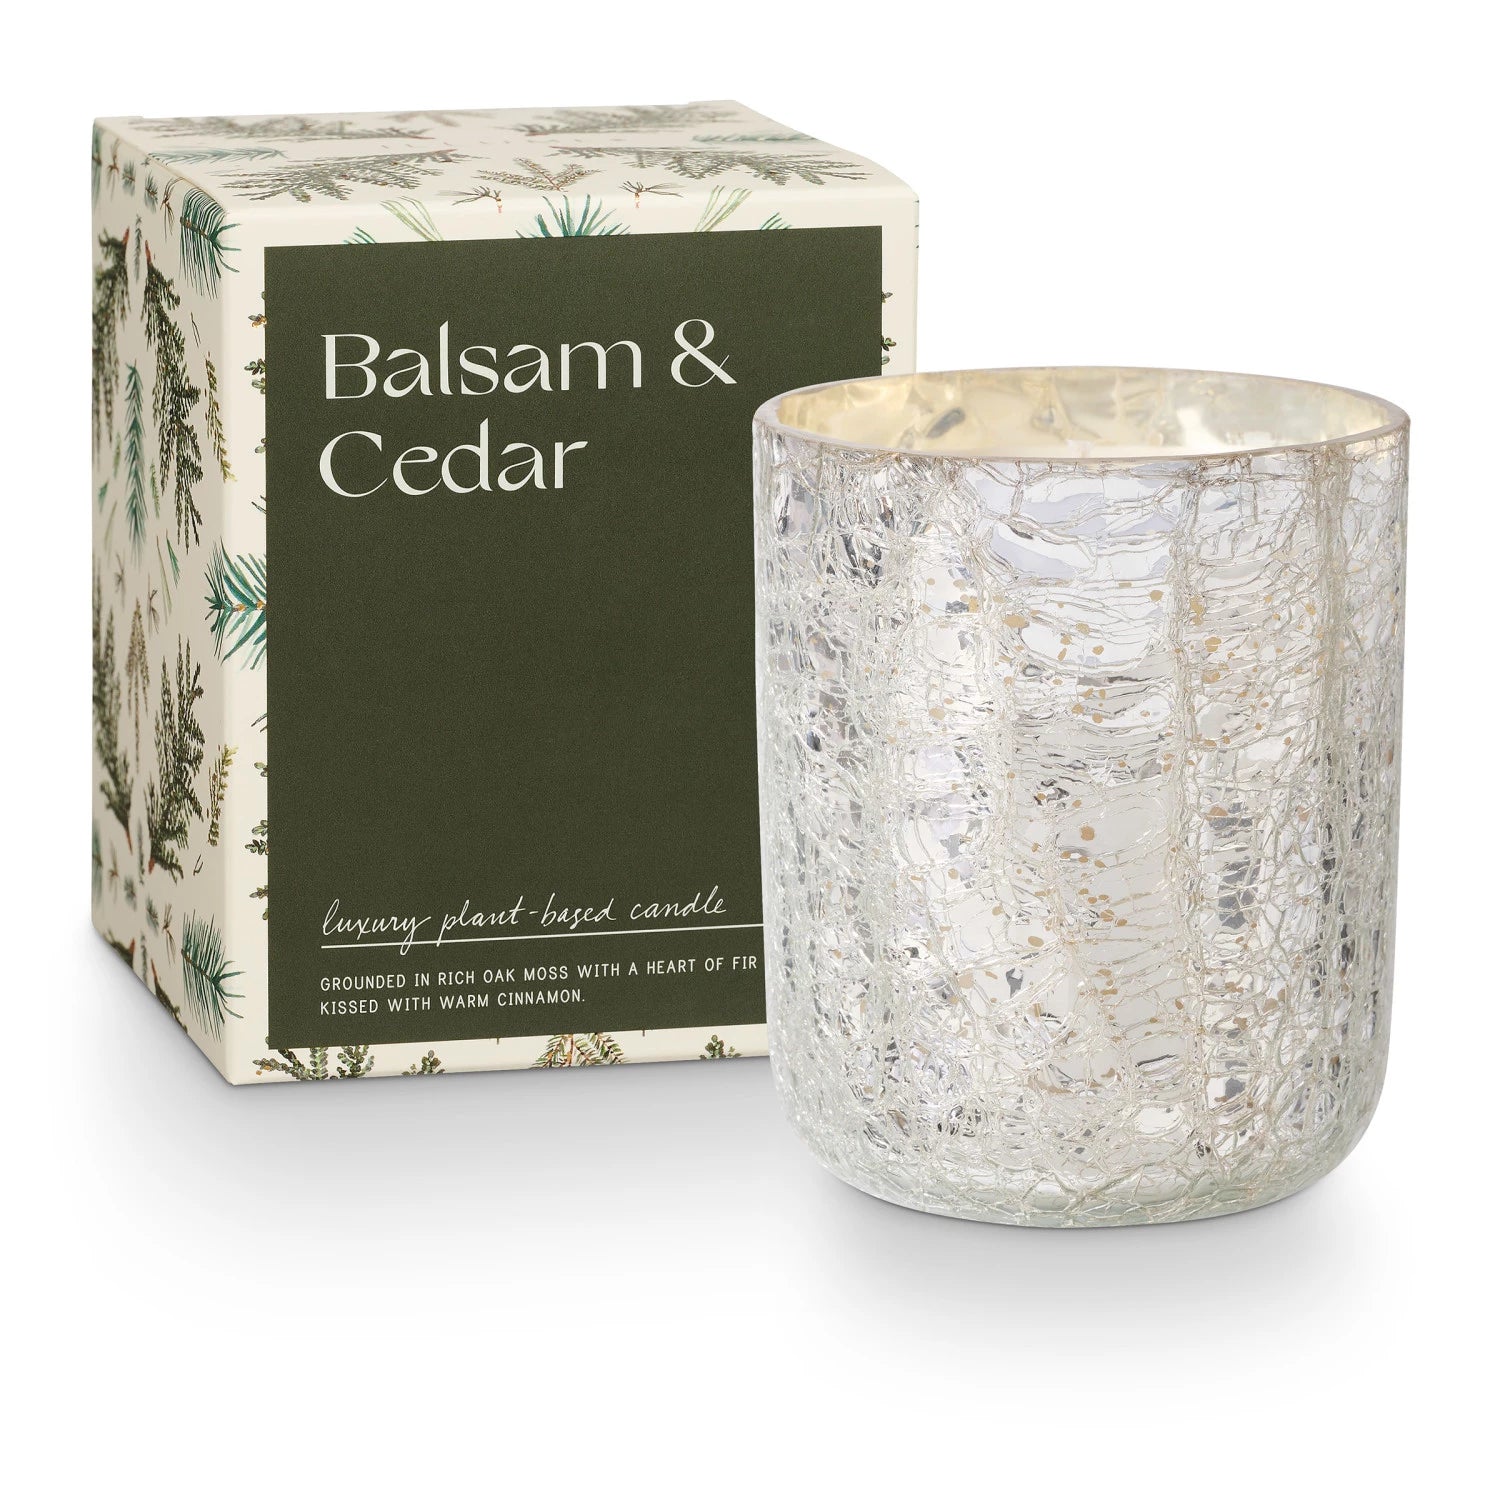 Balsam & Cedar Boxed Crackle Glass Candle ( 2 Sizes)